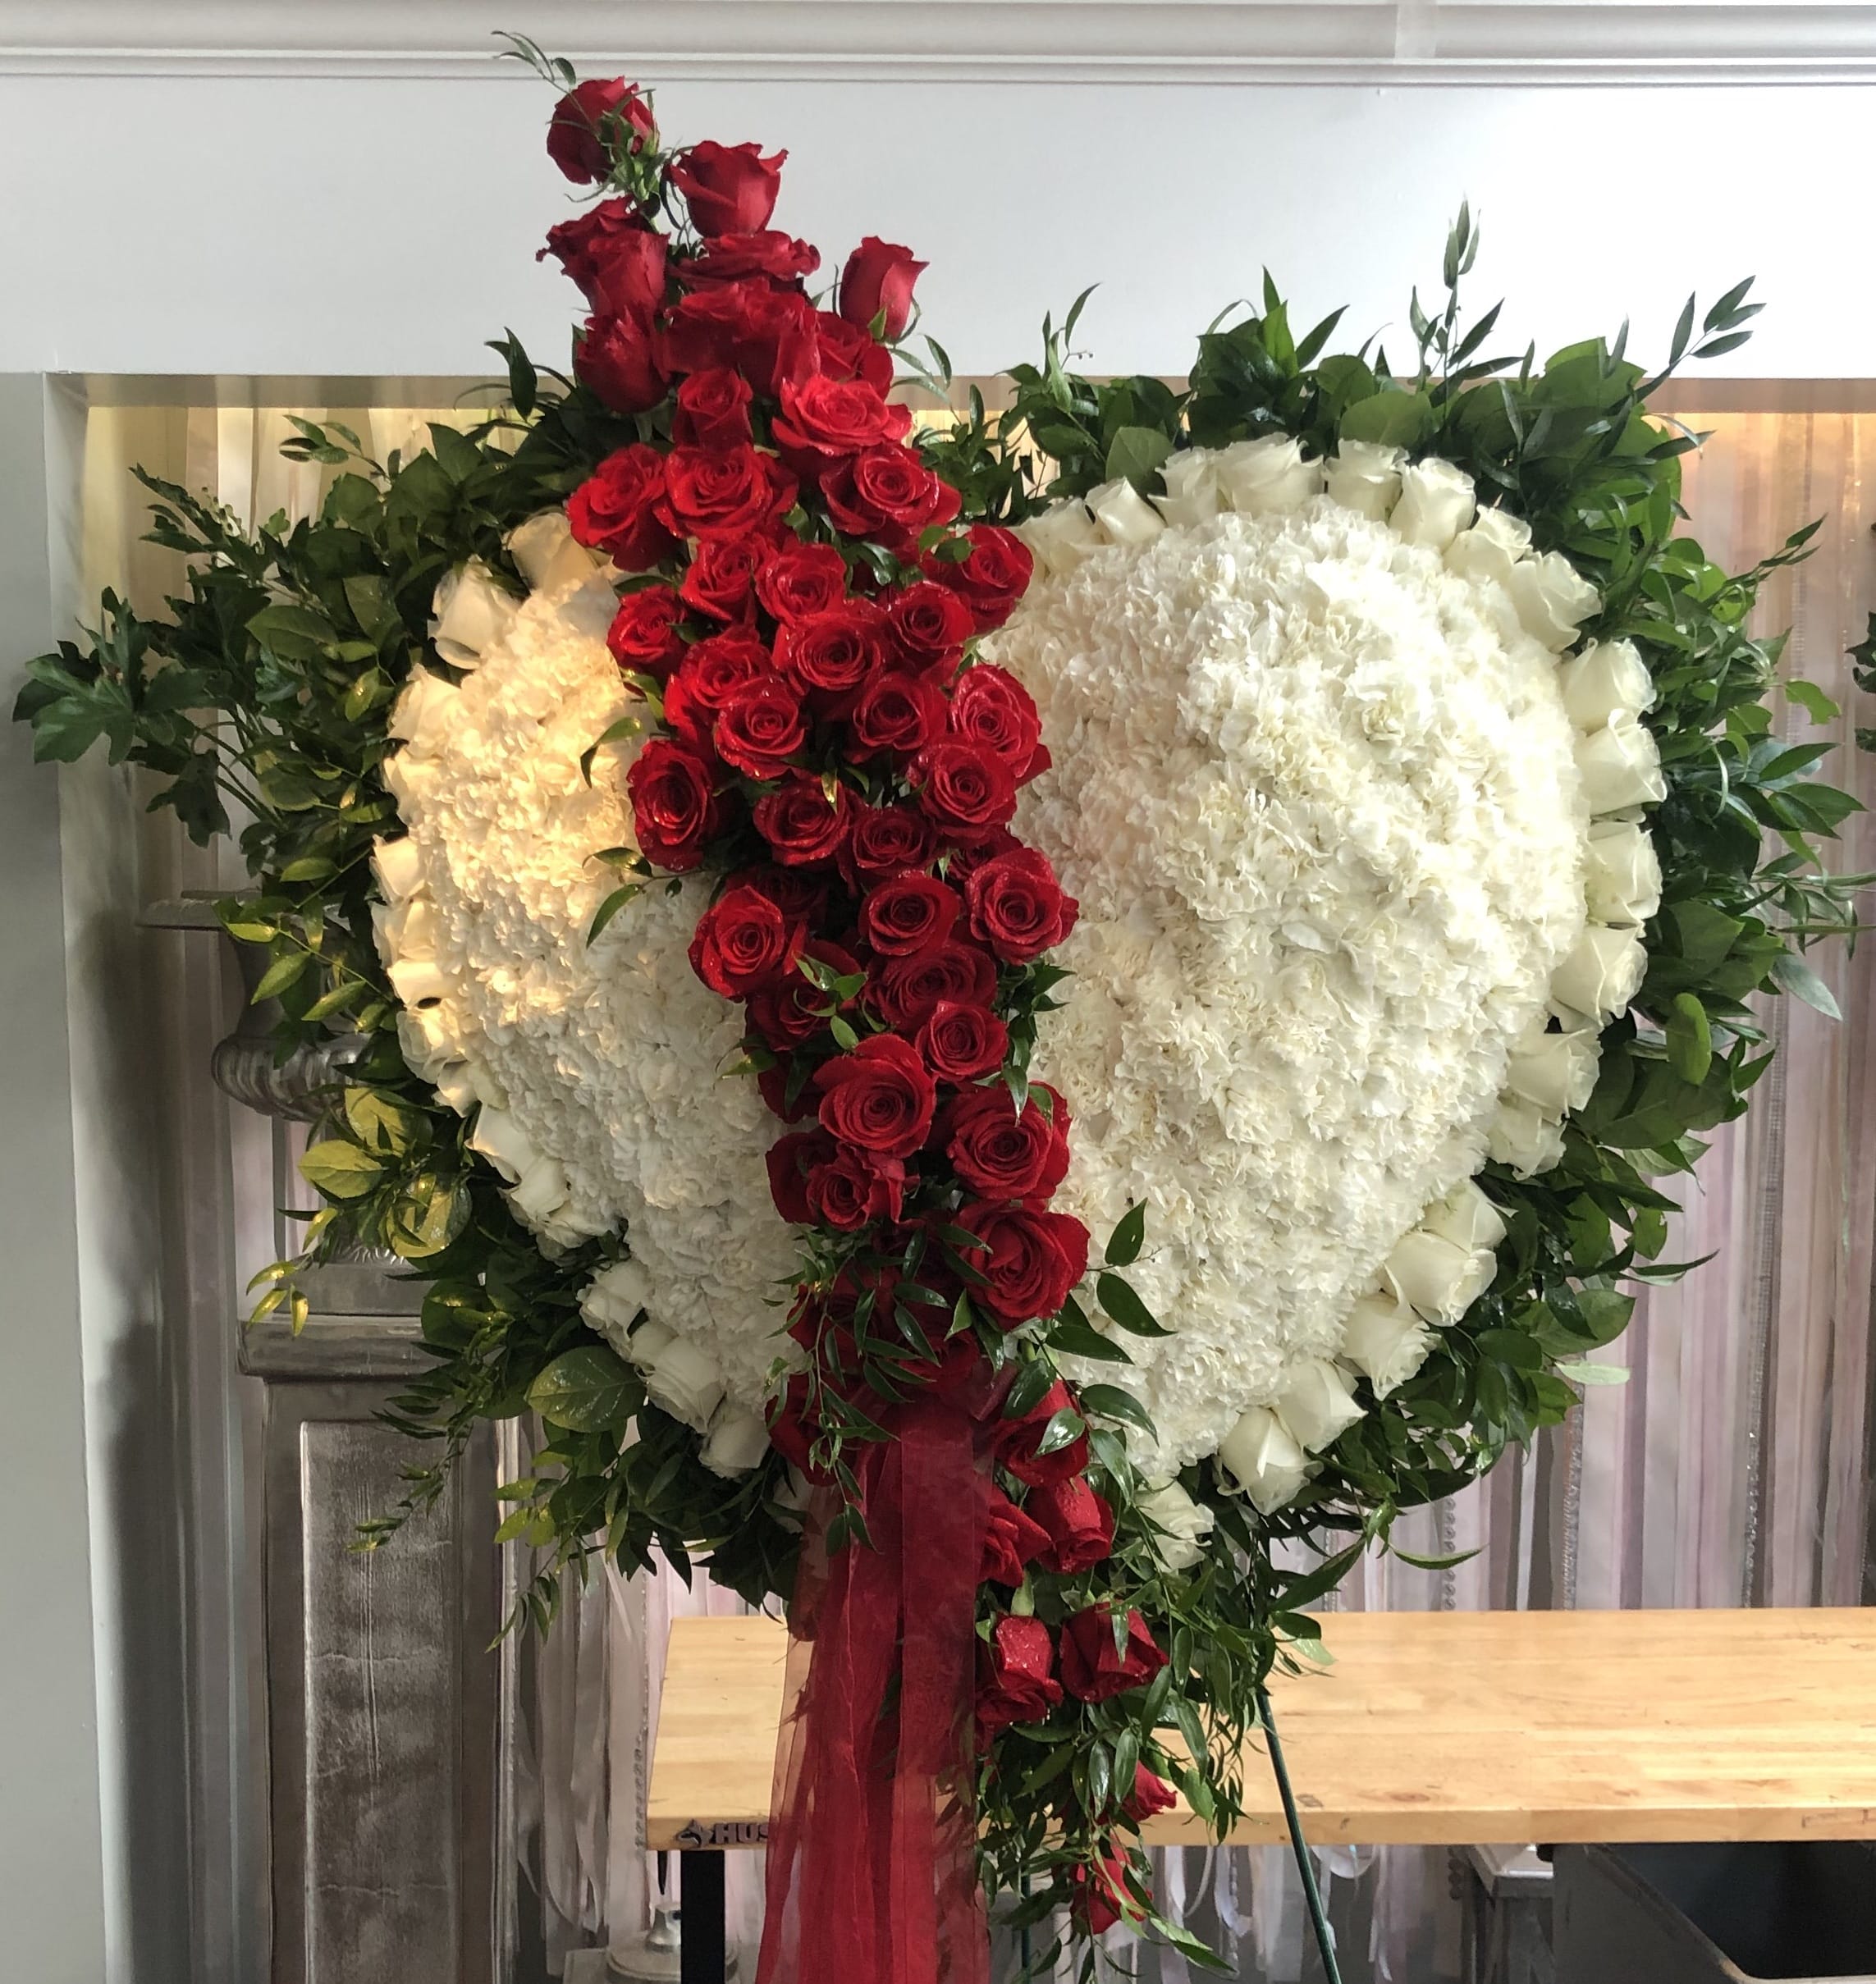 Red and White Heart Shaped Funeral Flowers